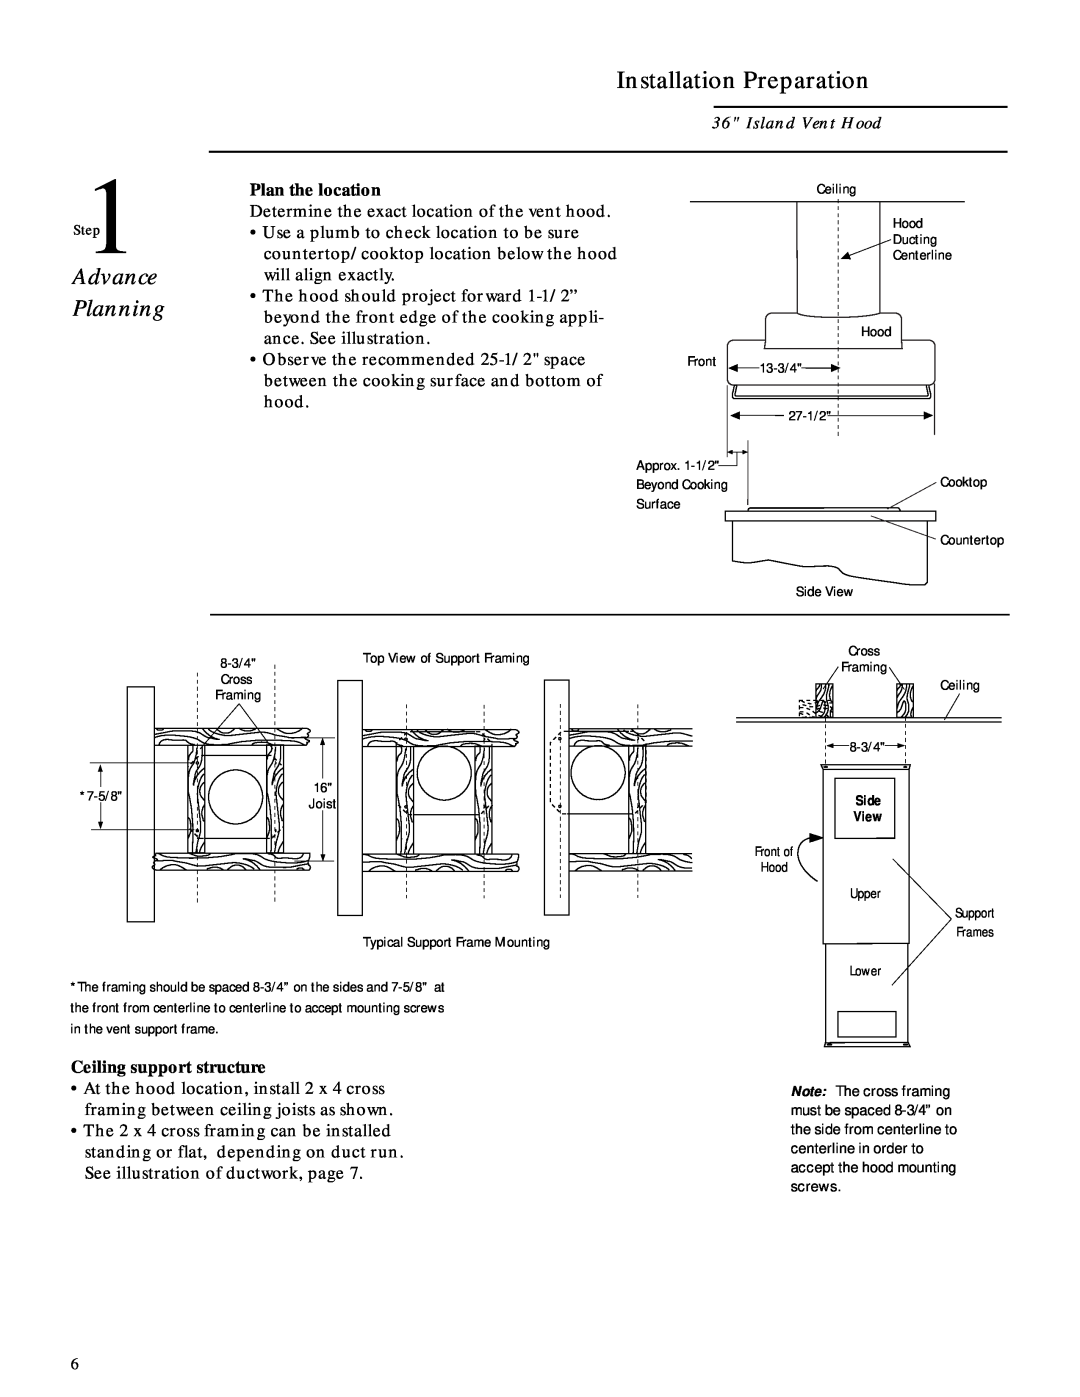 GE ZV850 installation instructions Advance Planning, Plan the location, Ceiling support structure, Installation Preparation 